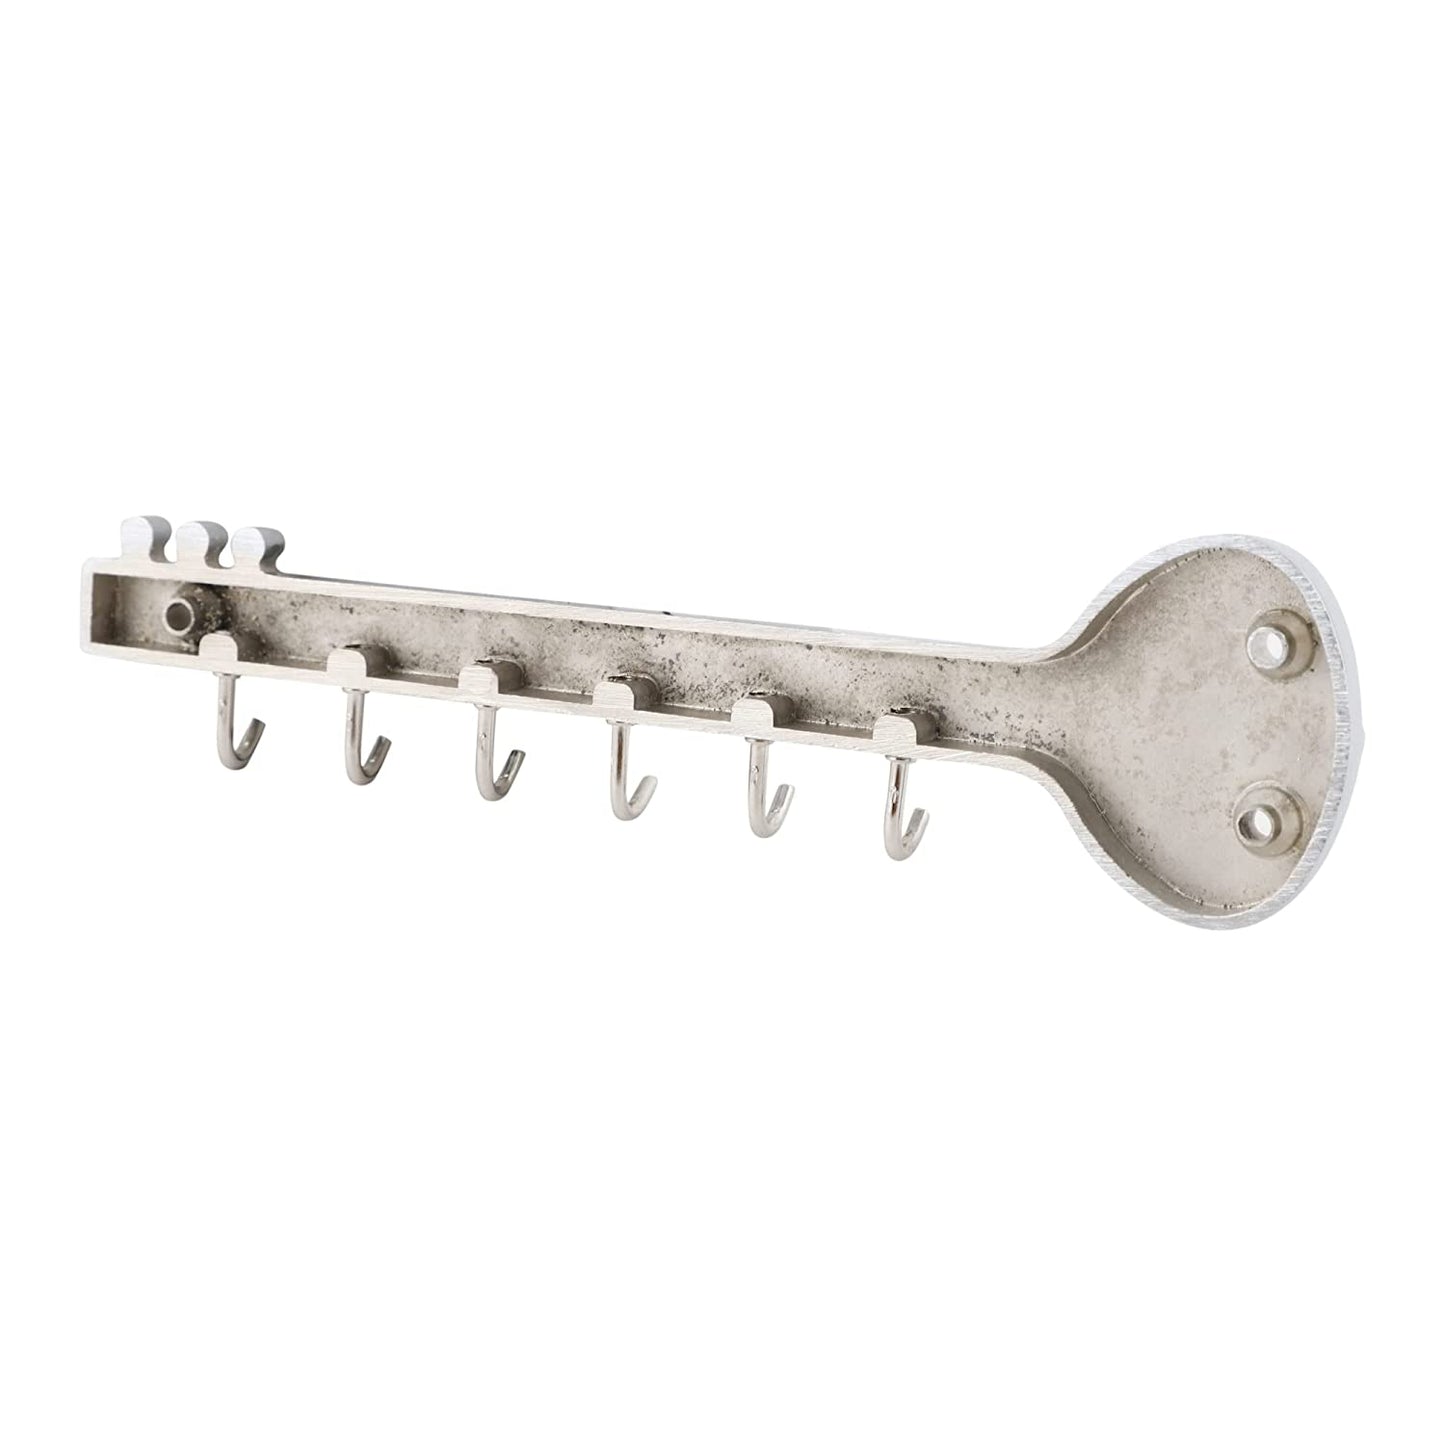 Chrome and Shiny Guitar Key Holder for Wall - 6 pin Key Hanging Hooks Rail Mangal Fashions | Indian Home Decor and Craft